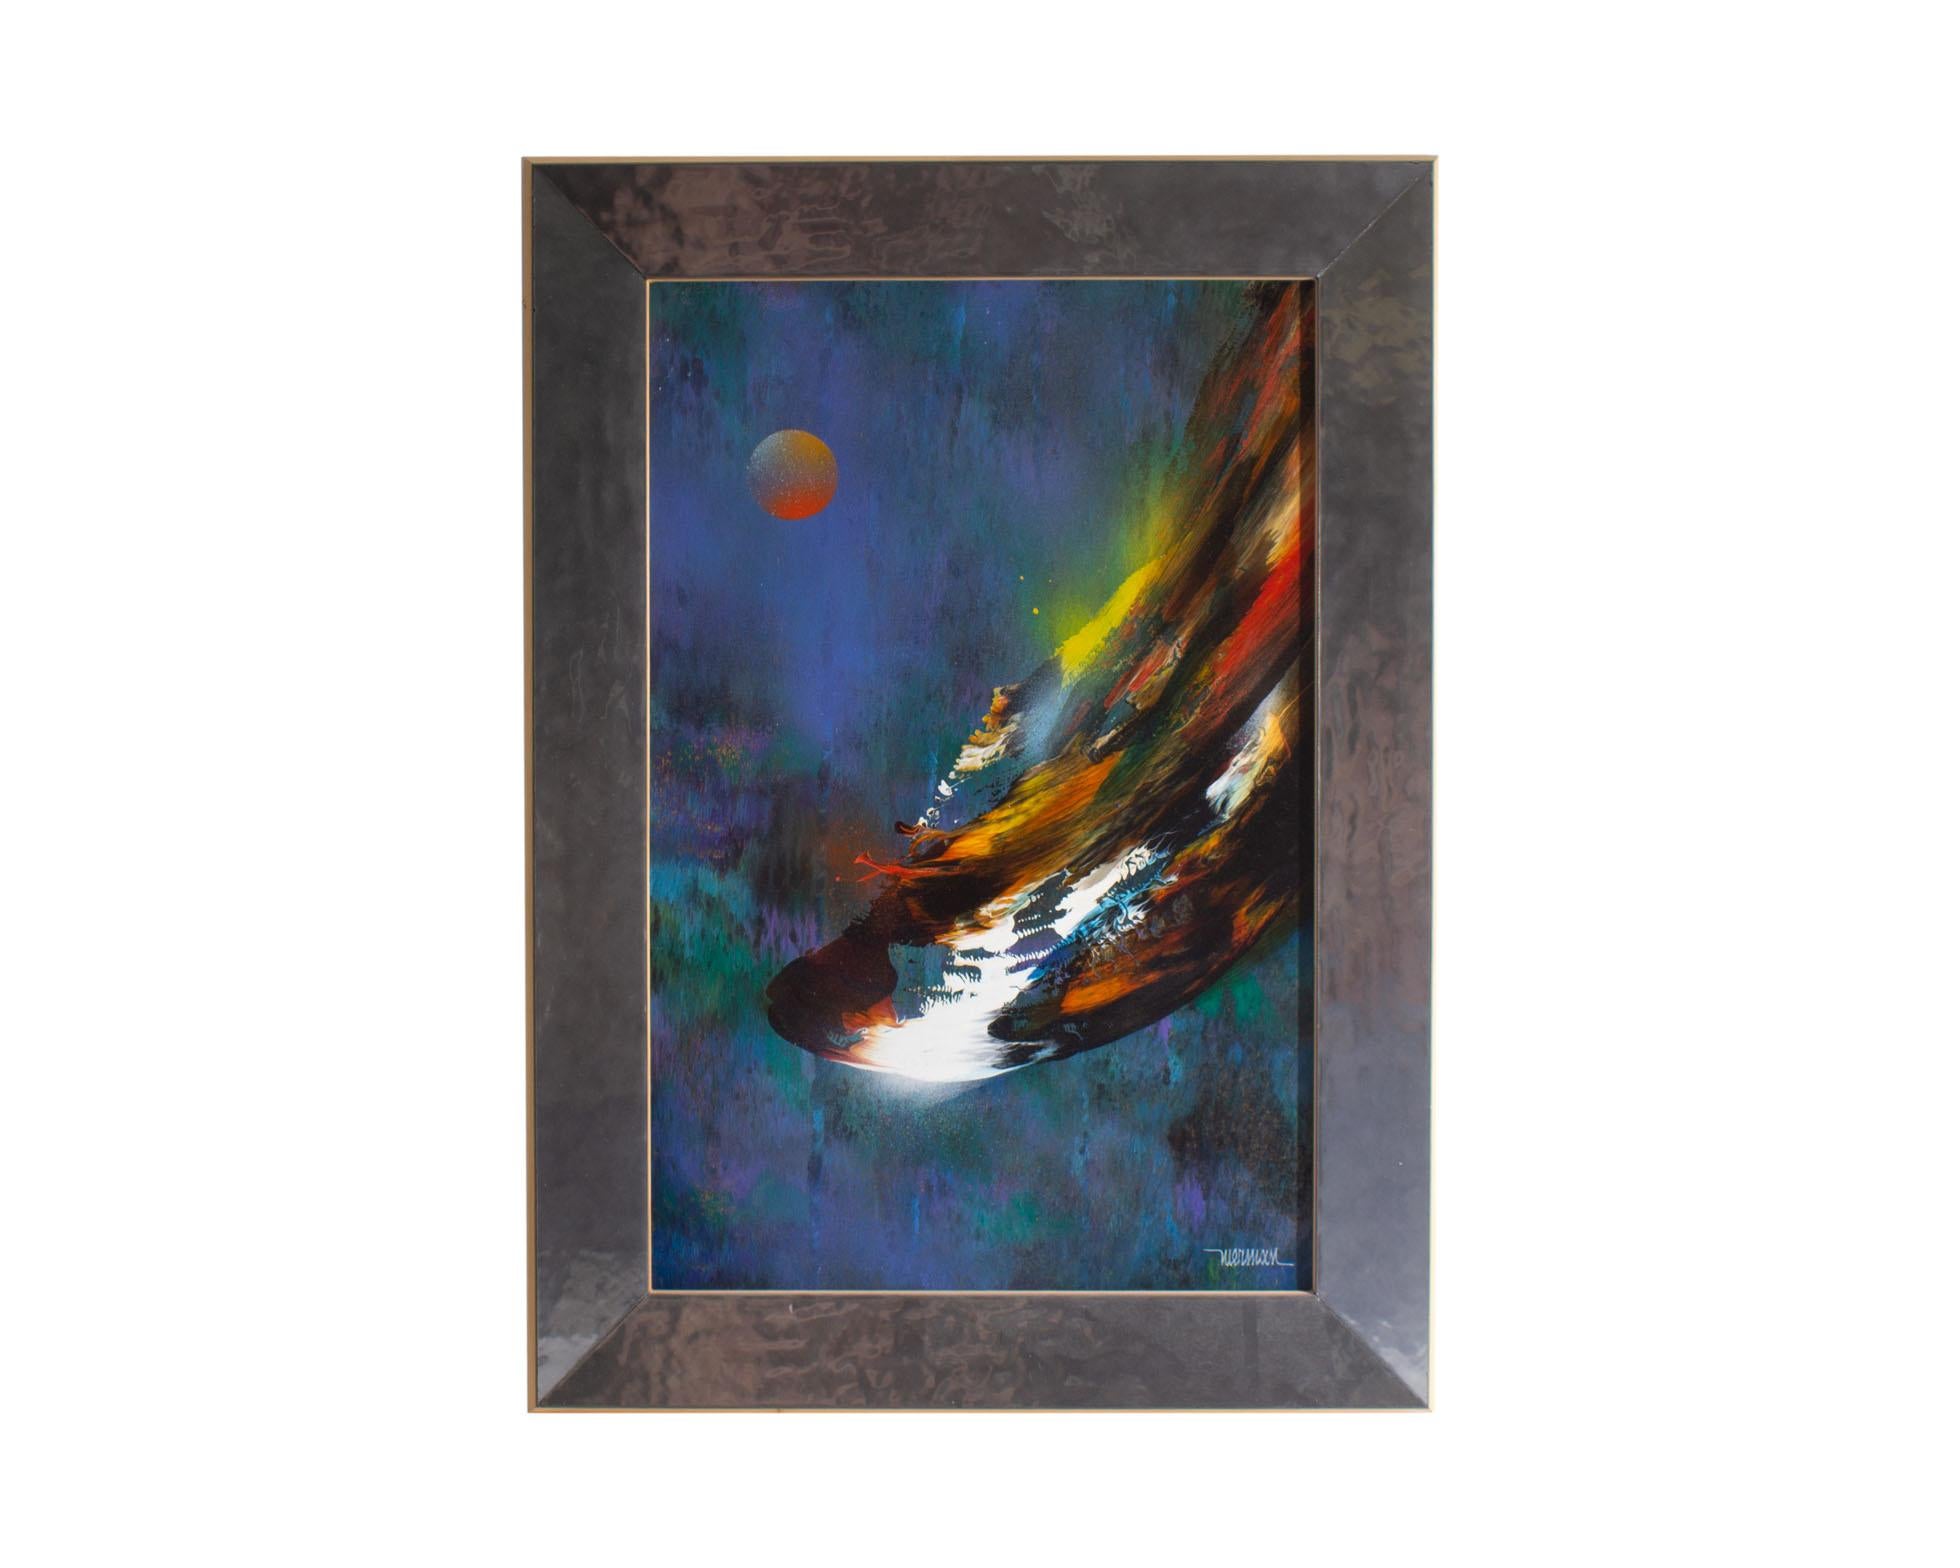 A 1970s oil on board painting by the Mexican artist Leonardo Nierman (1932-2023). Titled Cosmic Wind, this abstract and vibrant work depicts a swooping gust of color rushing across a cool background of blue, green, and purple. A hazy red-orange sun